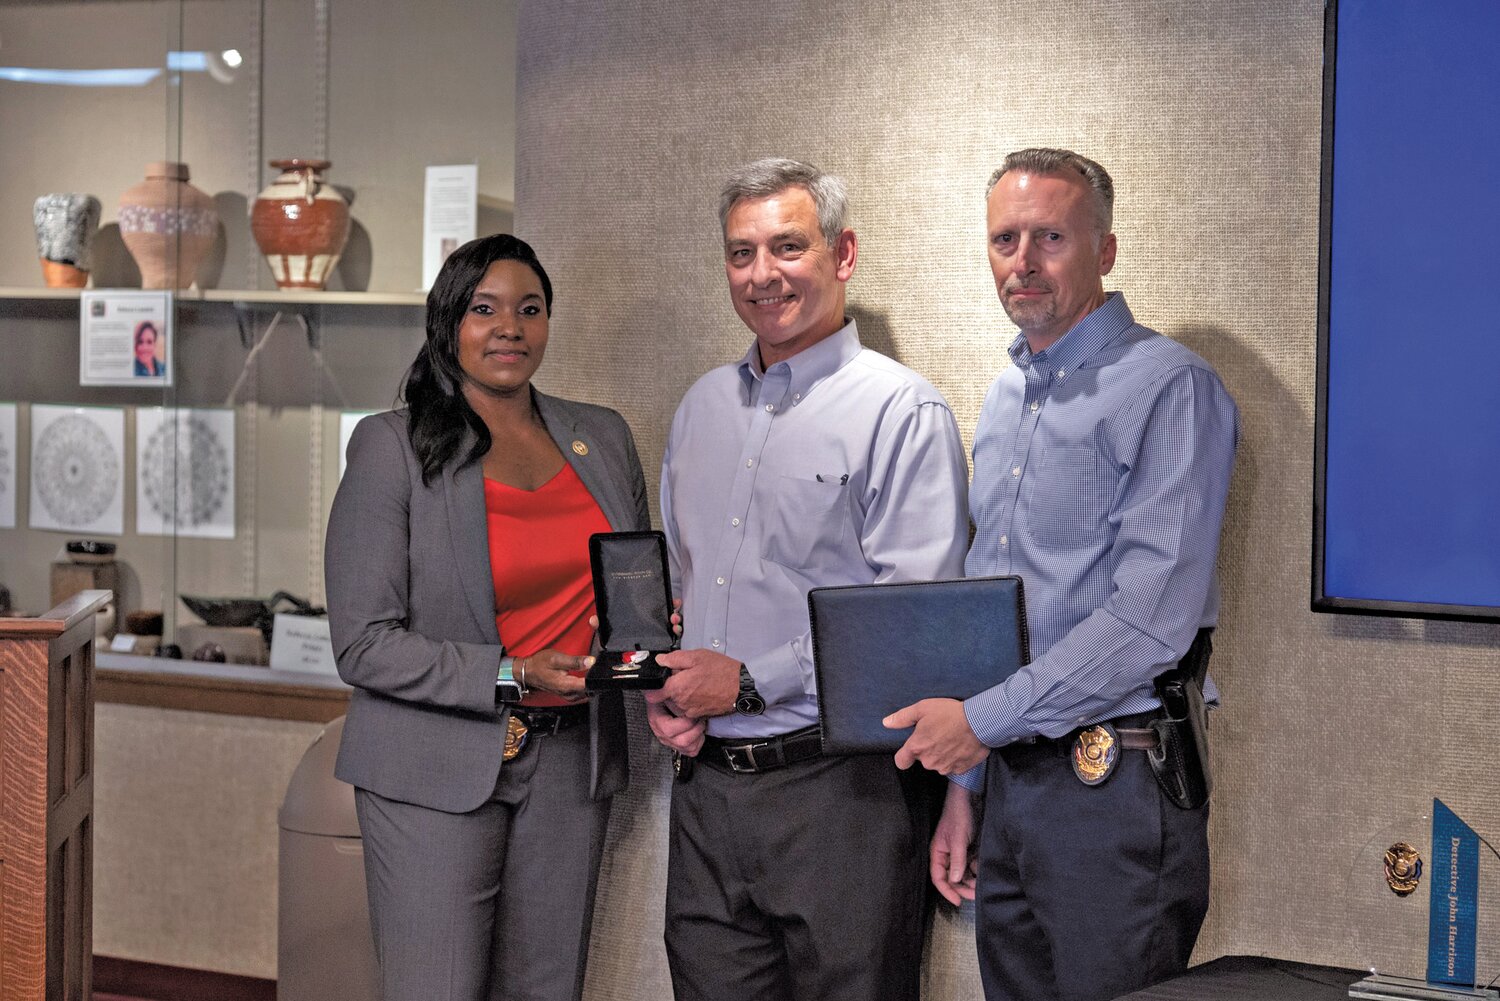 Sgt. Detective LaMour Romine (left) and Chief of Police Brent Narges (right) present the department’s Meritorious Service Medal to Detective John Harrison (center) during his retirement ceremony held Tuesday, May 30.